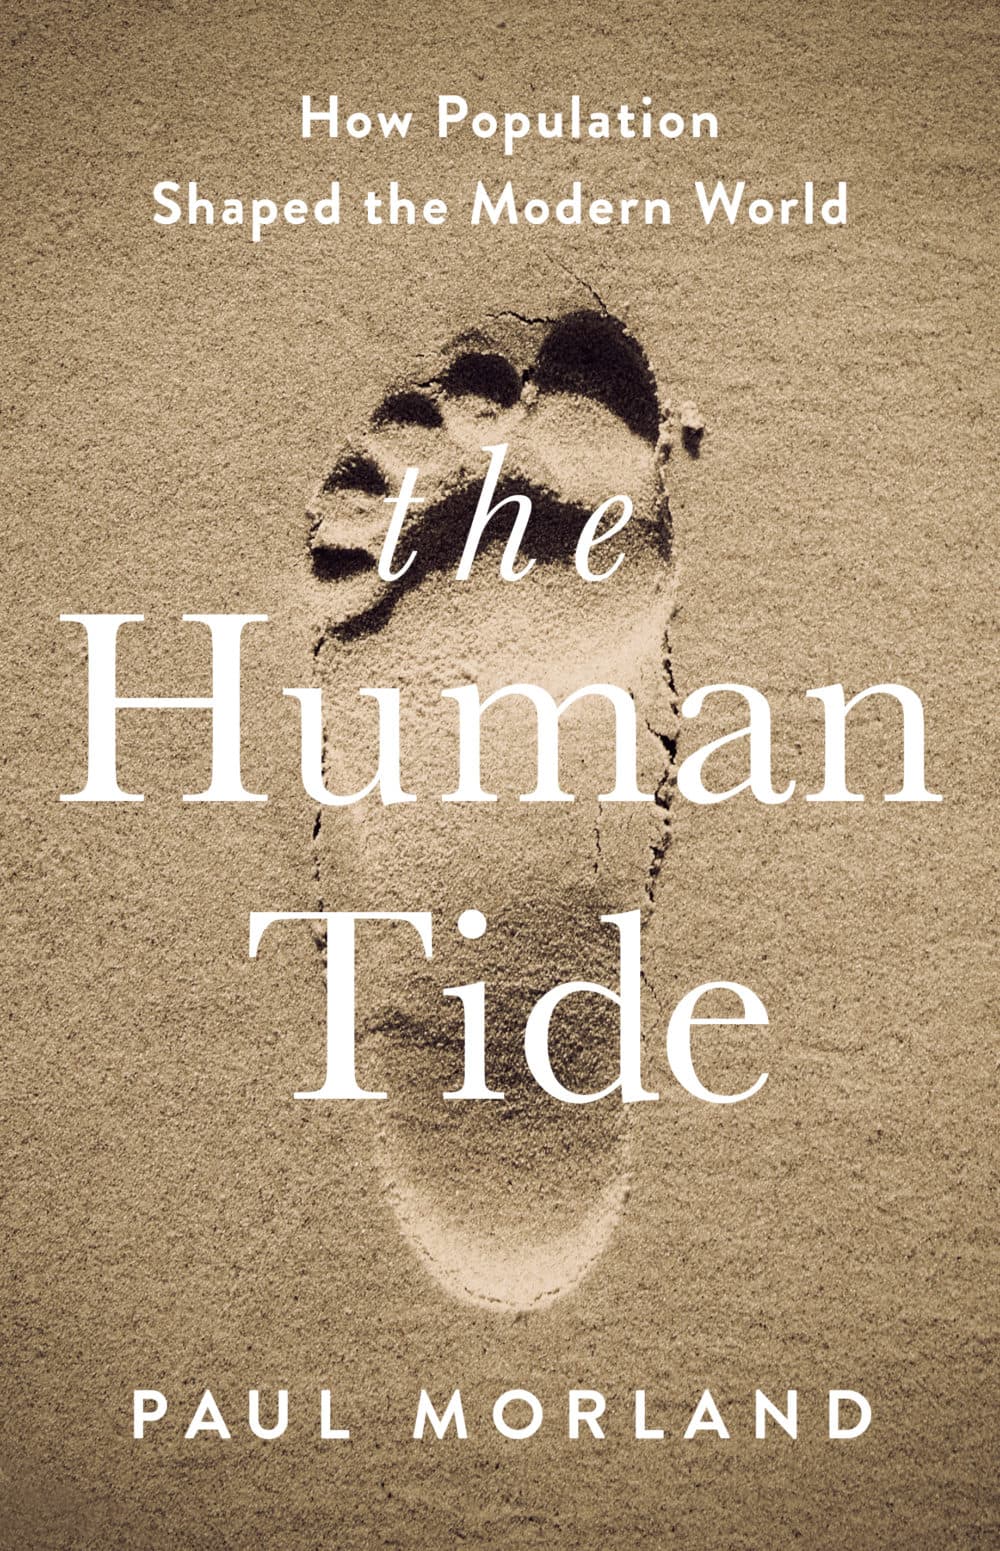 &quot;The Human Tide&quot; by Paul Morland. (Courtesy of Hachette Book Group)